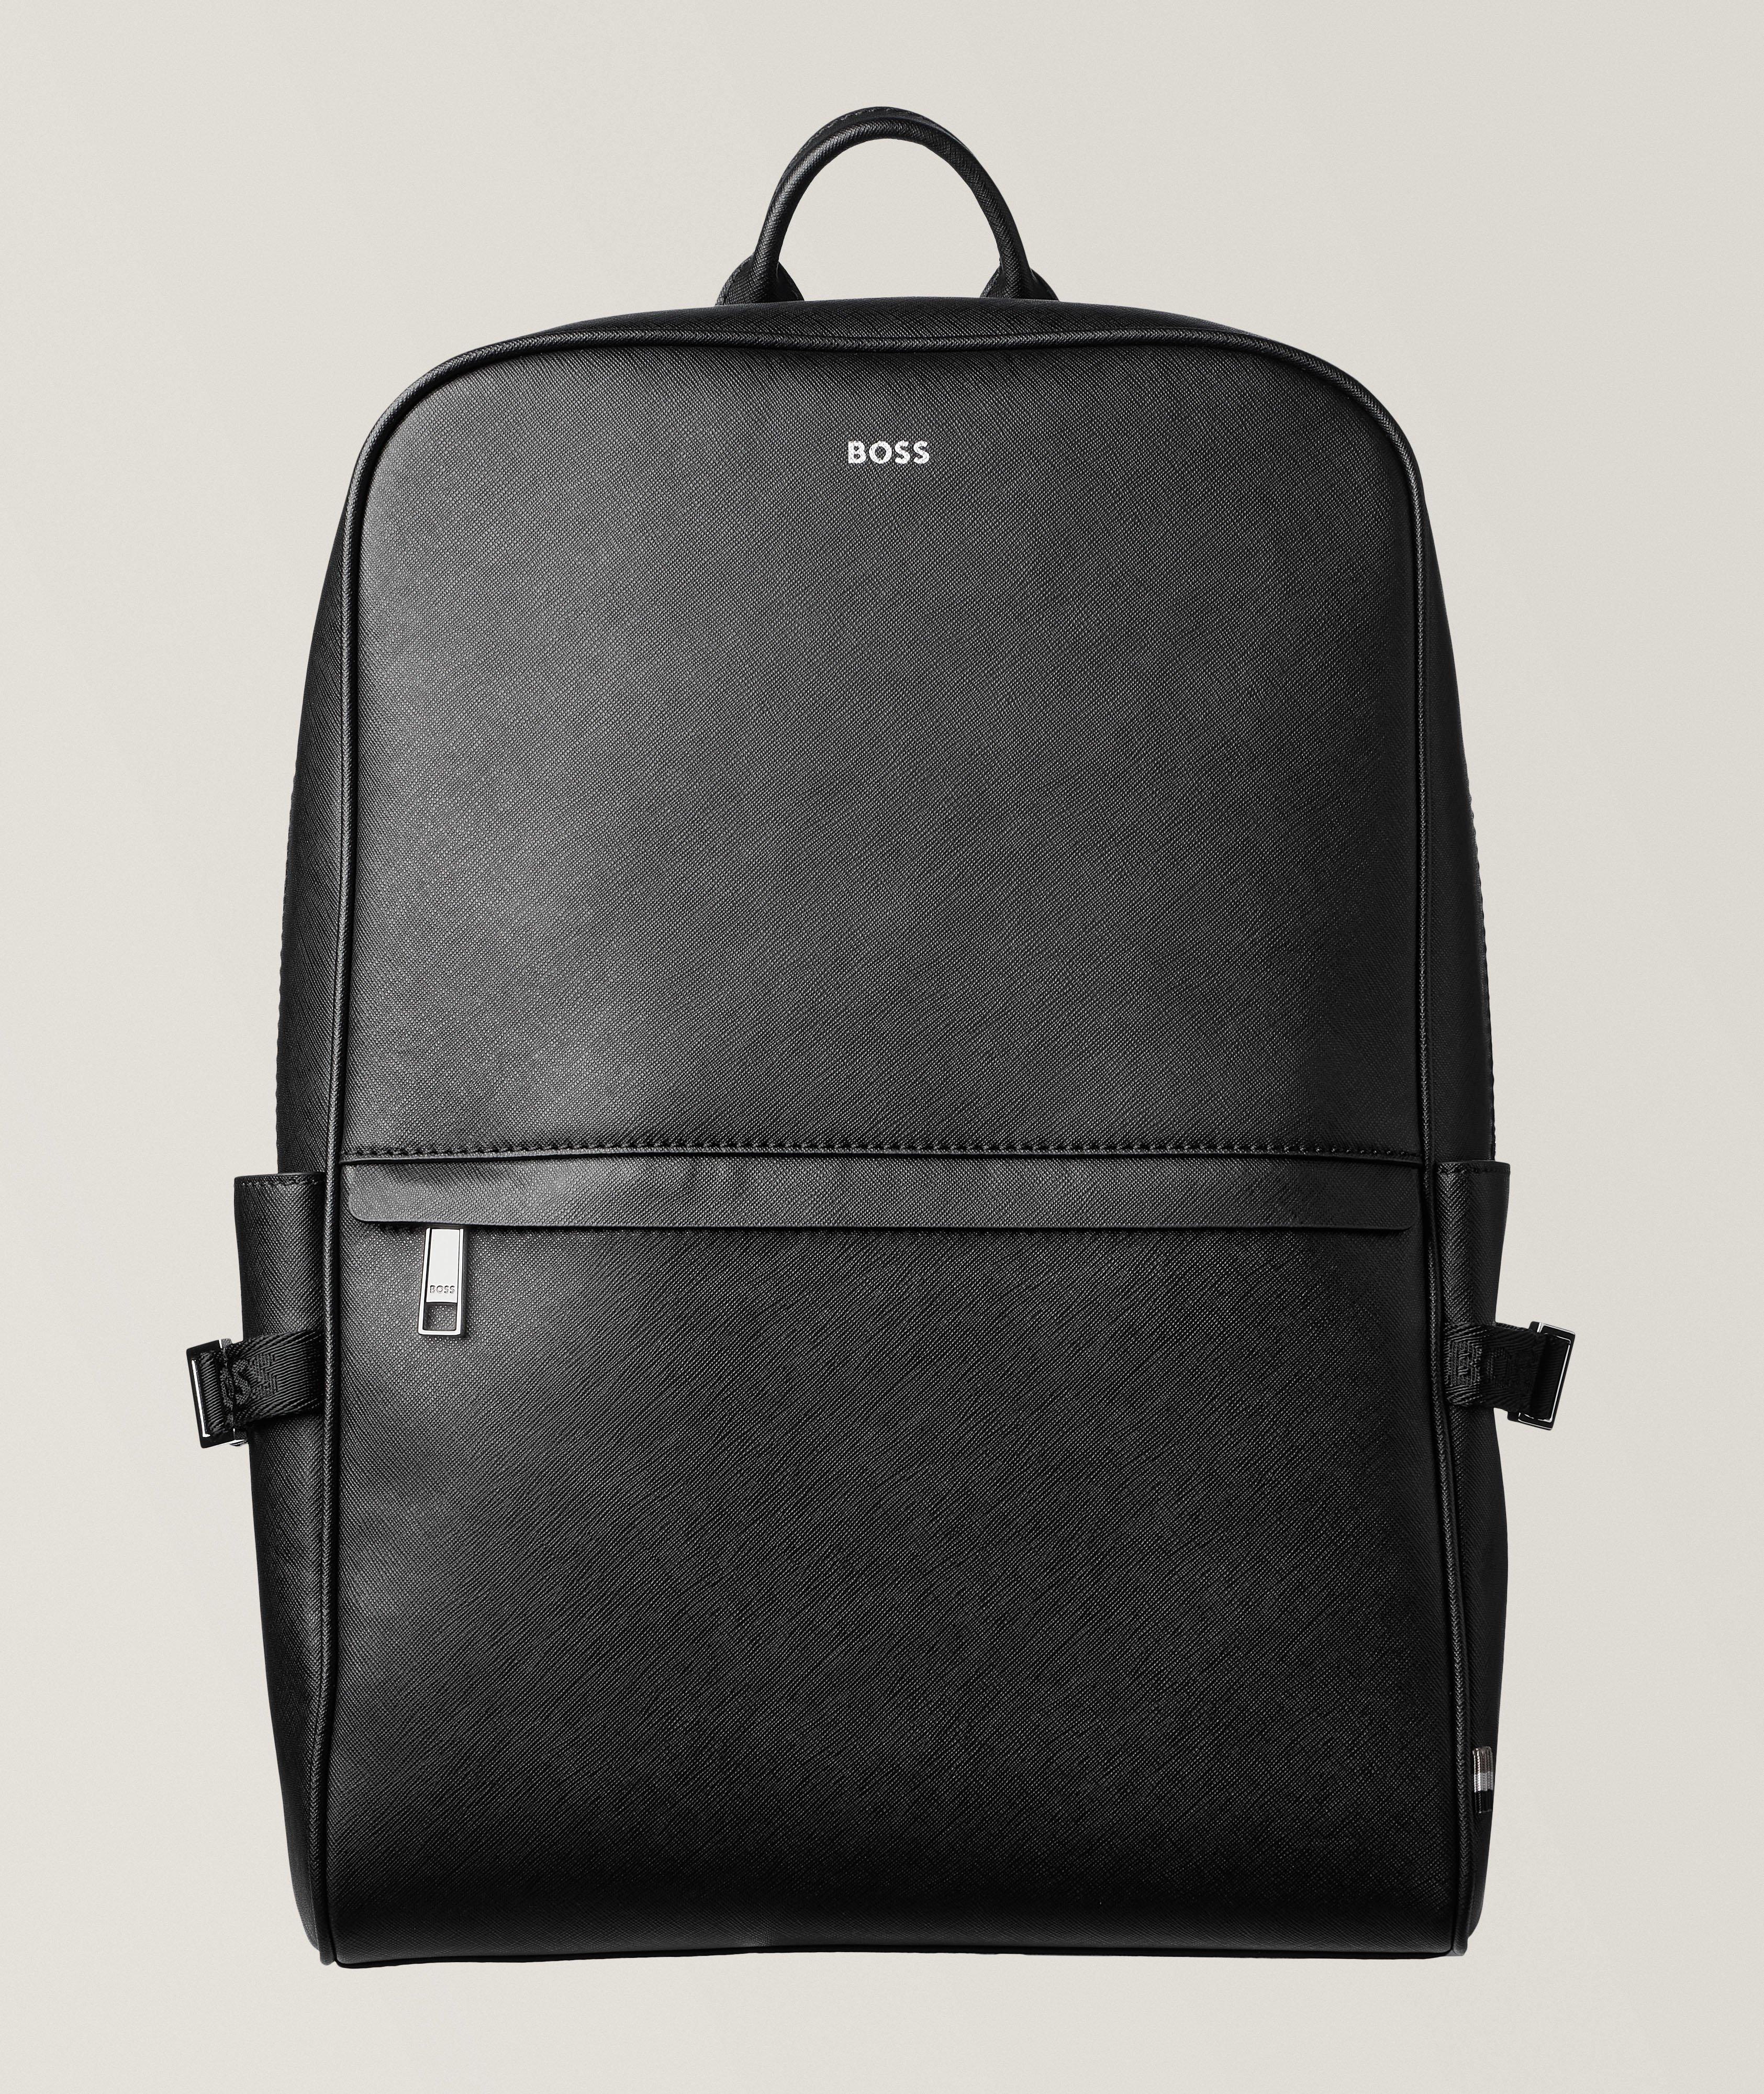 Zair Technical Fabric Backpack image 0